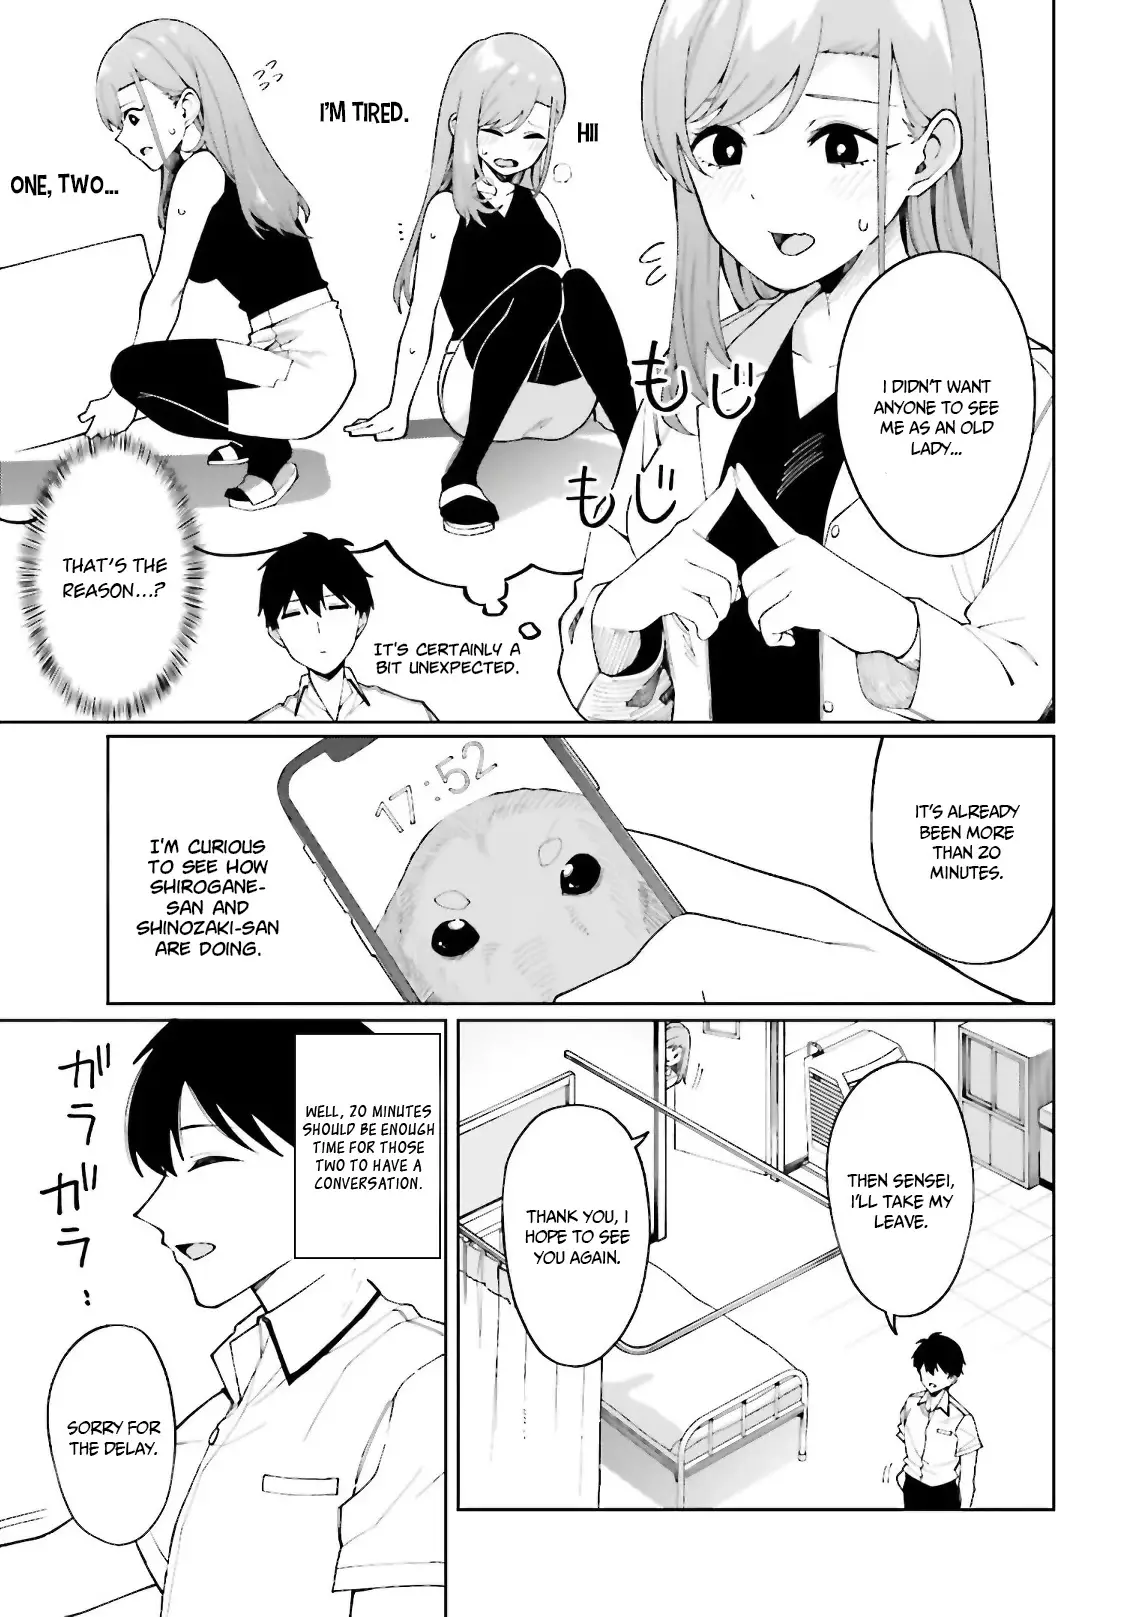 I Don't Understand Shirogane-San's Facial Expression At All - 7 page 22-2fca6fdd